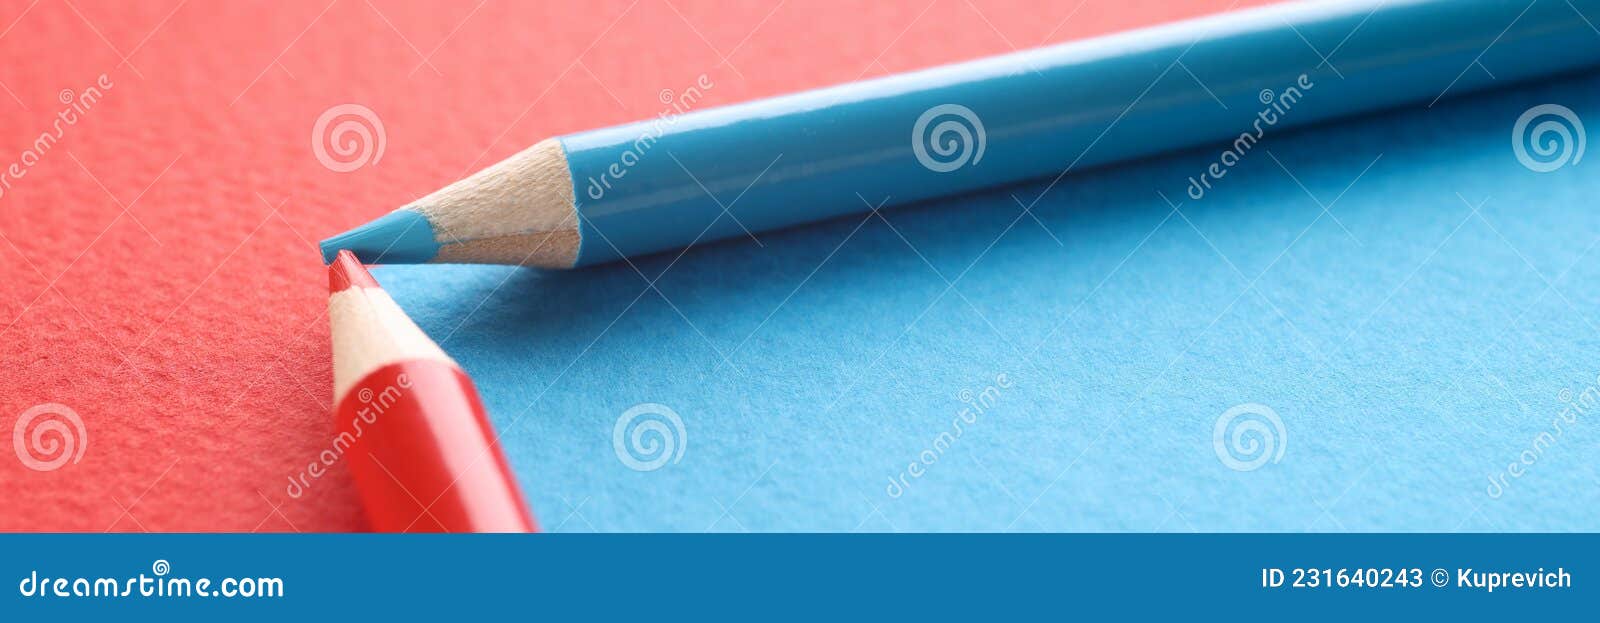 Blue and Red Pencils on Red and Blue Background Stock Image - Image of ...